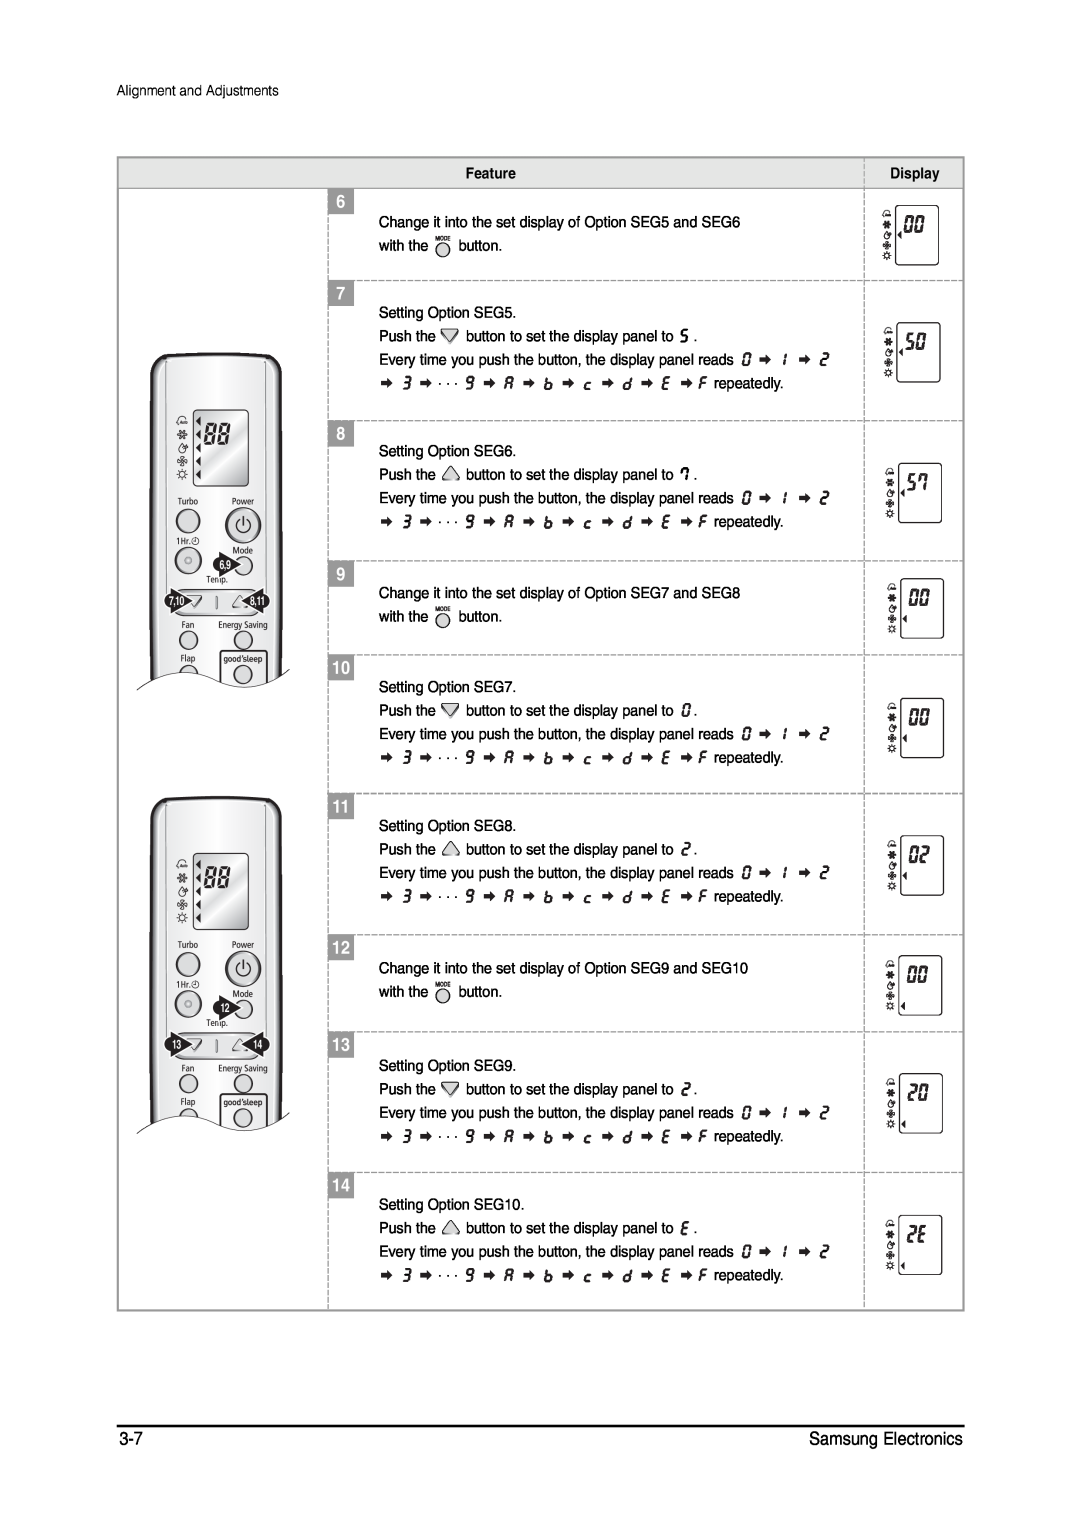 Samsung MH026FNCA service manual Alignment and Adjustments 